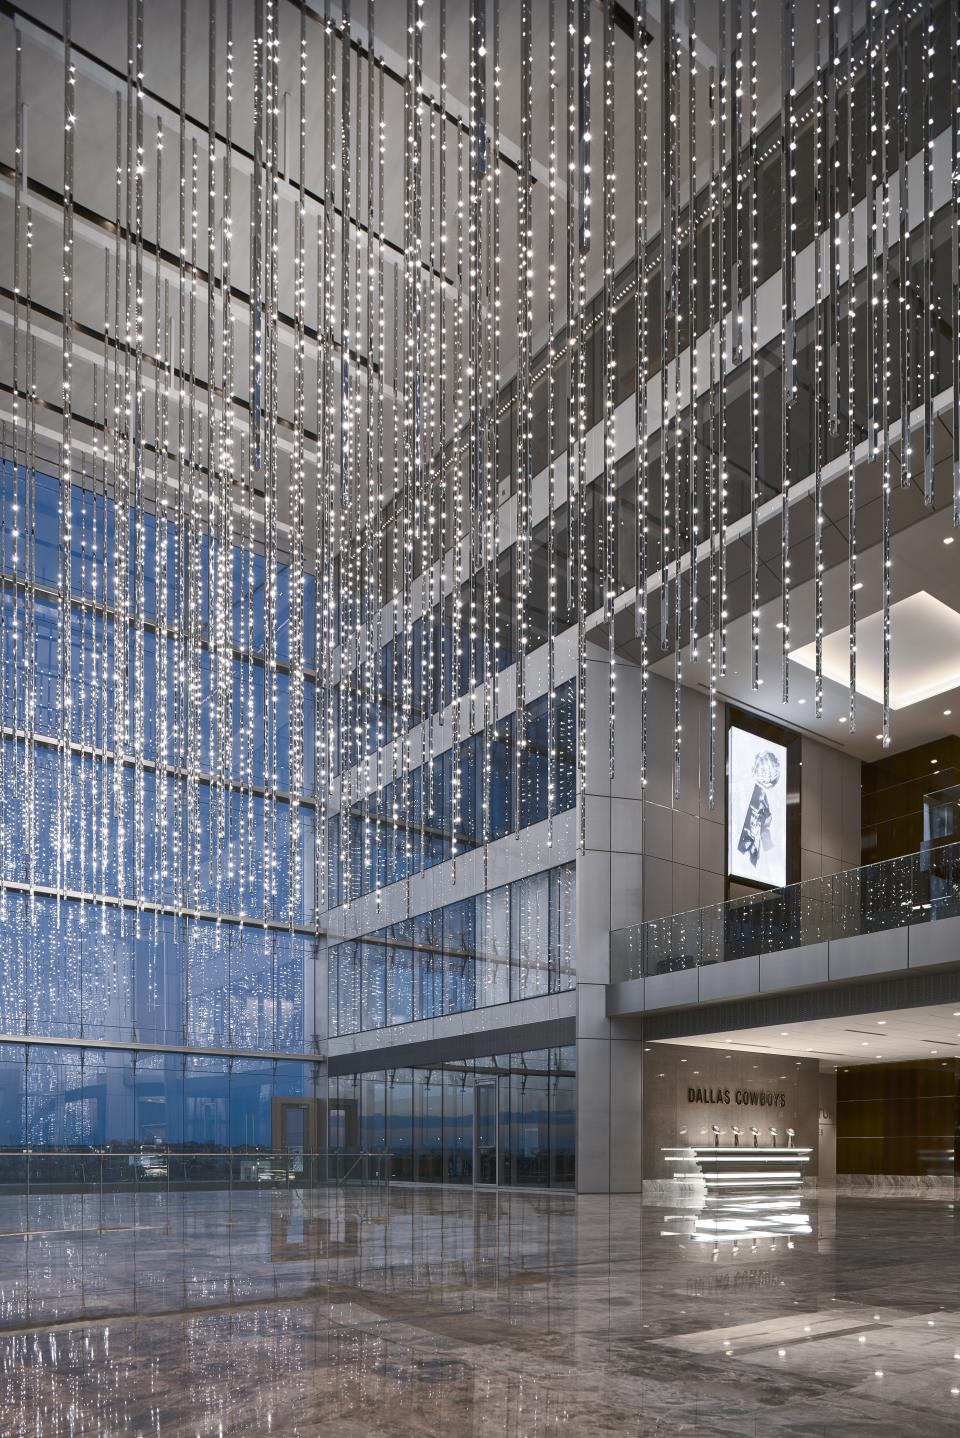 A central atrium in the office building features a light installation by Leo Villareal, Volume (Frisco), that contains 19,200 lights embedded in 160, 40-foot-tall metal rods. Other artworks on display at The Star include pieces by Doug Aitken and Julie Mehretu.